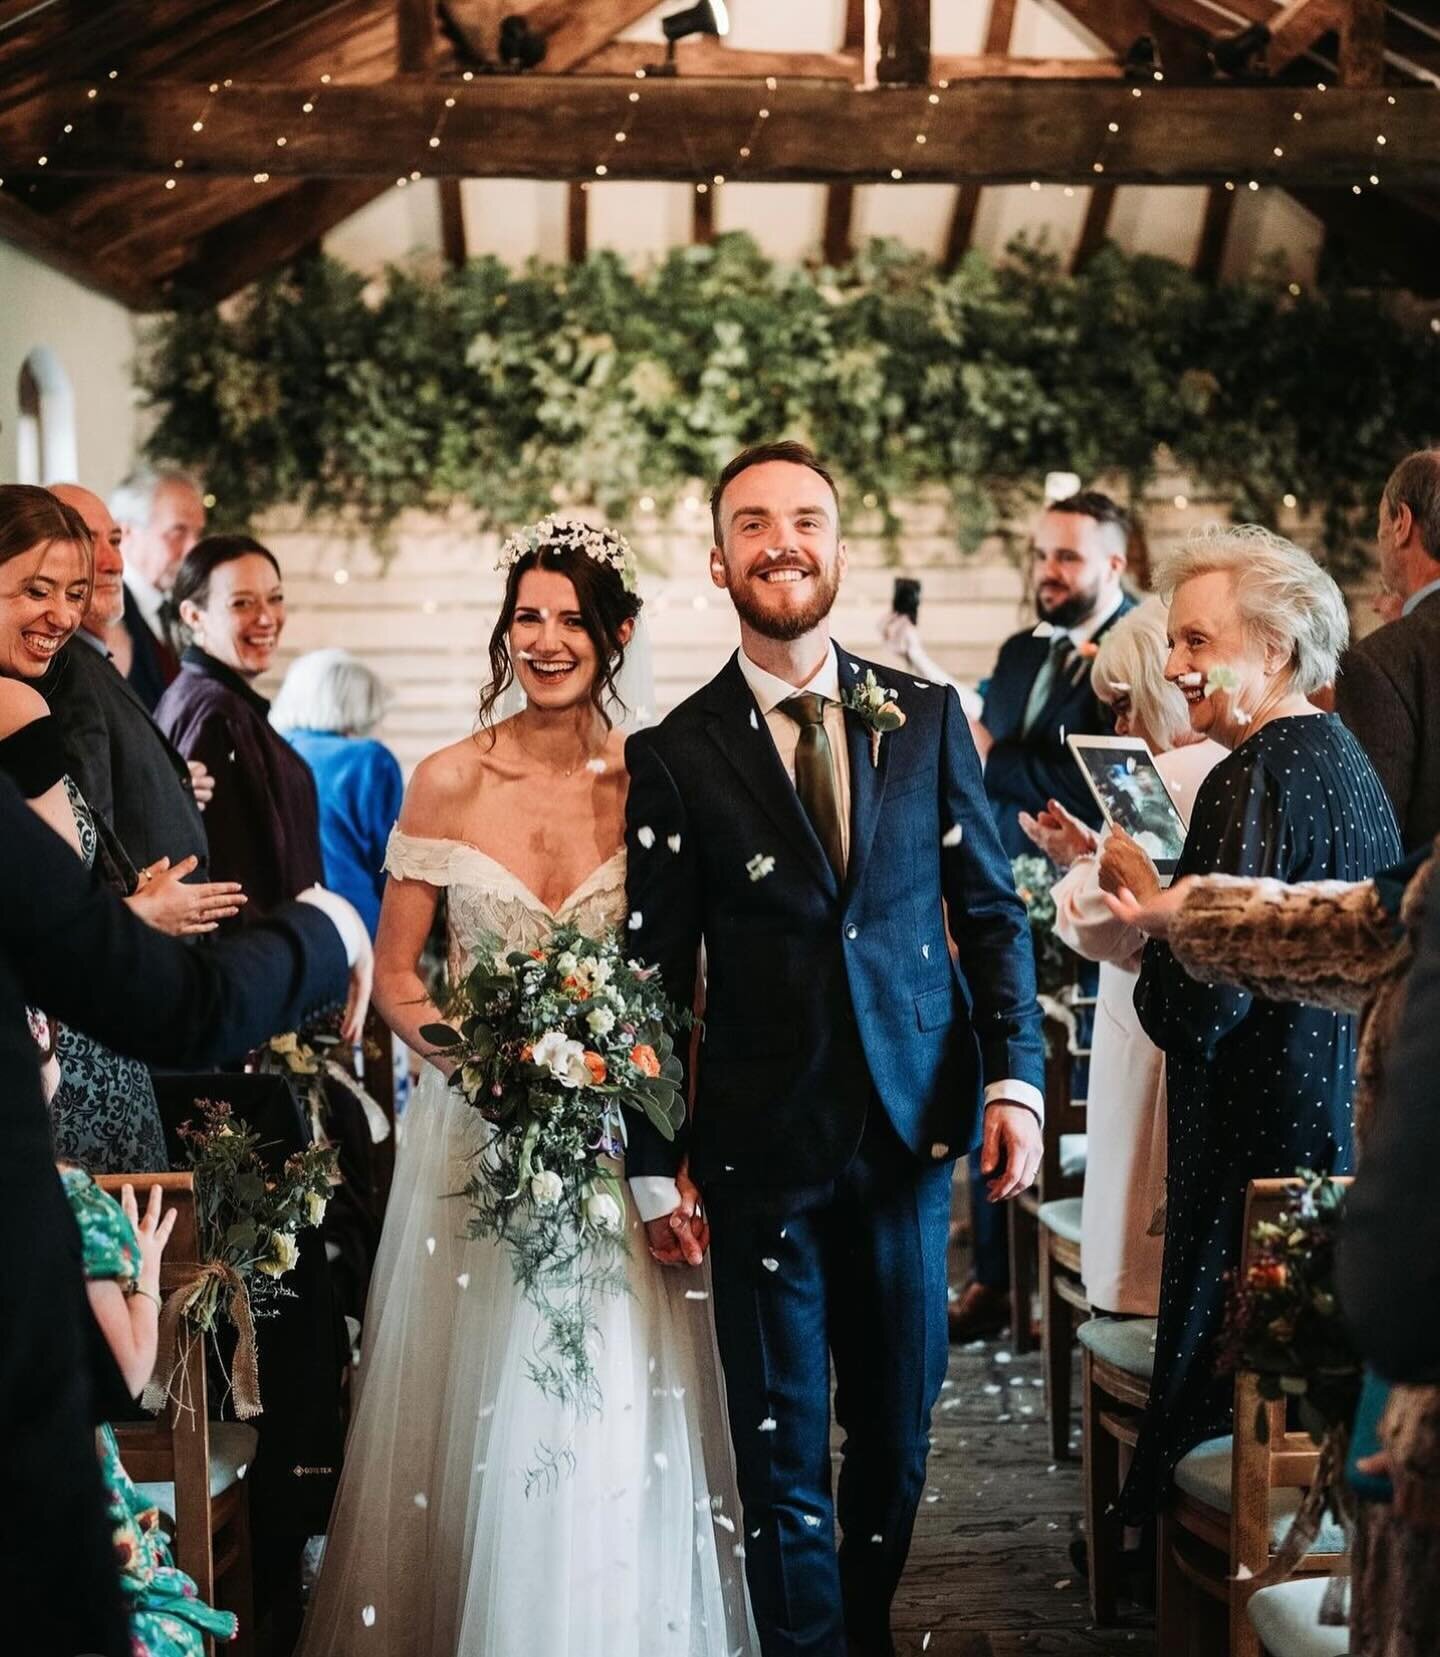 A sneak peek at last weekend&rsquo;s wedding thanks to the speedy work of @lukehardyphotography 😁

What an absolutely beautiful day it was 💕
It may have been raining for a lot of the day, but just look at the smiles on those faces 😊